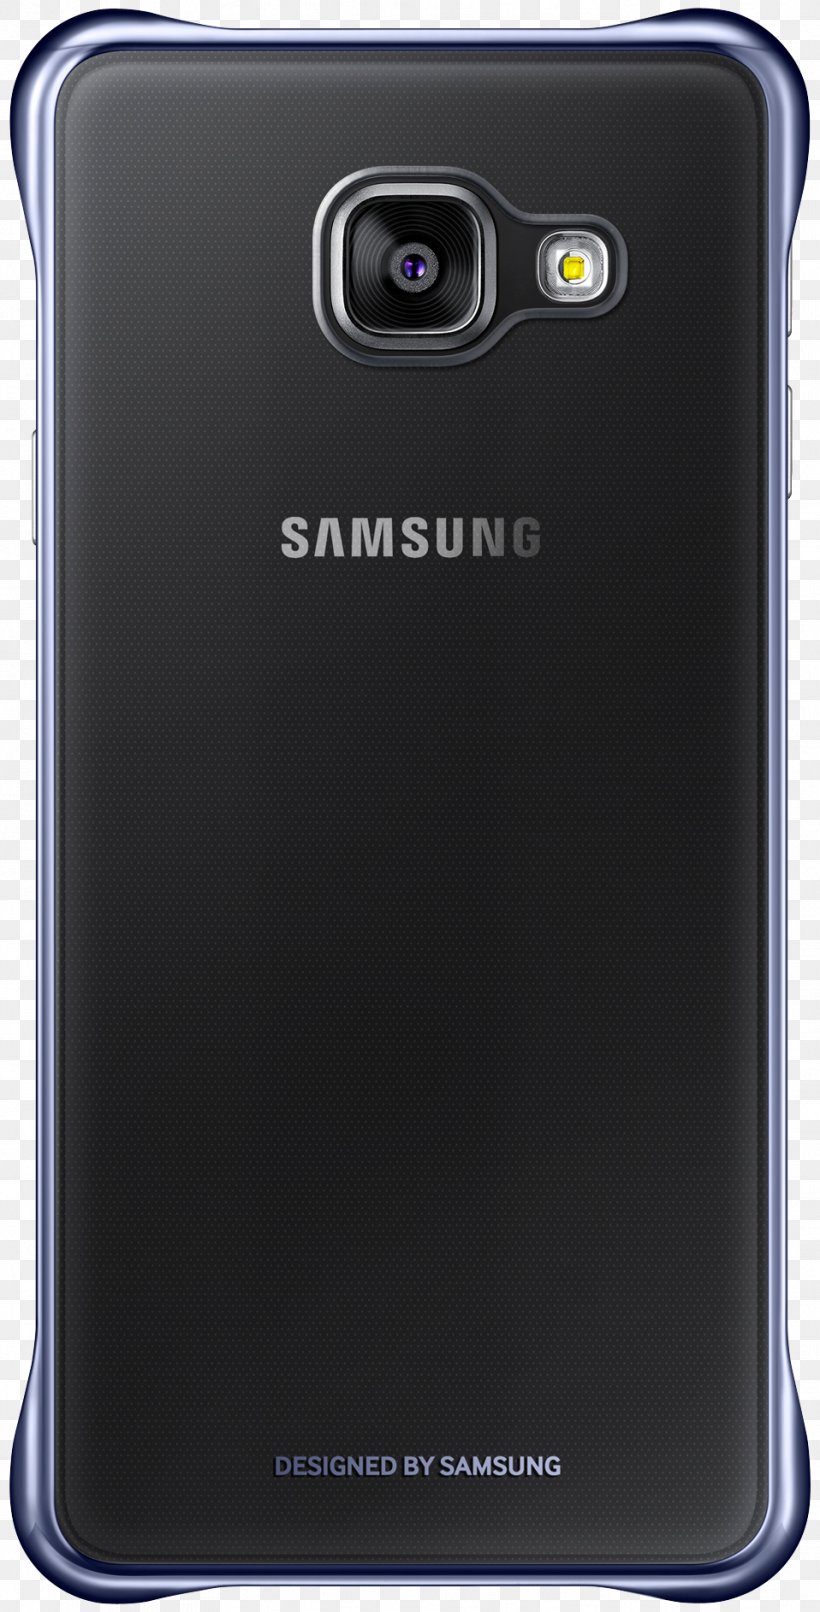 Samsung GALAXY S7 Edge Samsung Galaxy A5 (2016) Samsung Galaxy A3 (2015) Samsung Galaxy S8 Samsung Galaxy A3 (2017), PNG, 958x1884px, Samsung Galaxy S7 Edge, Android, Cellular Network, Communication Device, Electronic Device Download Free